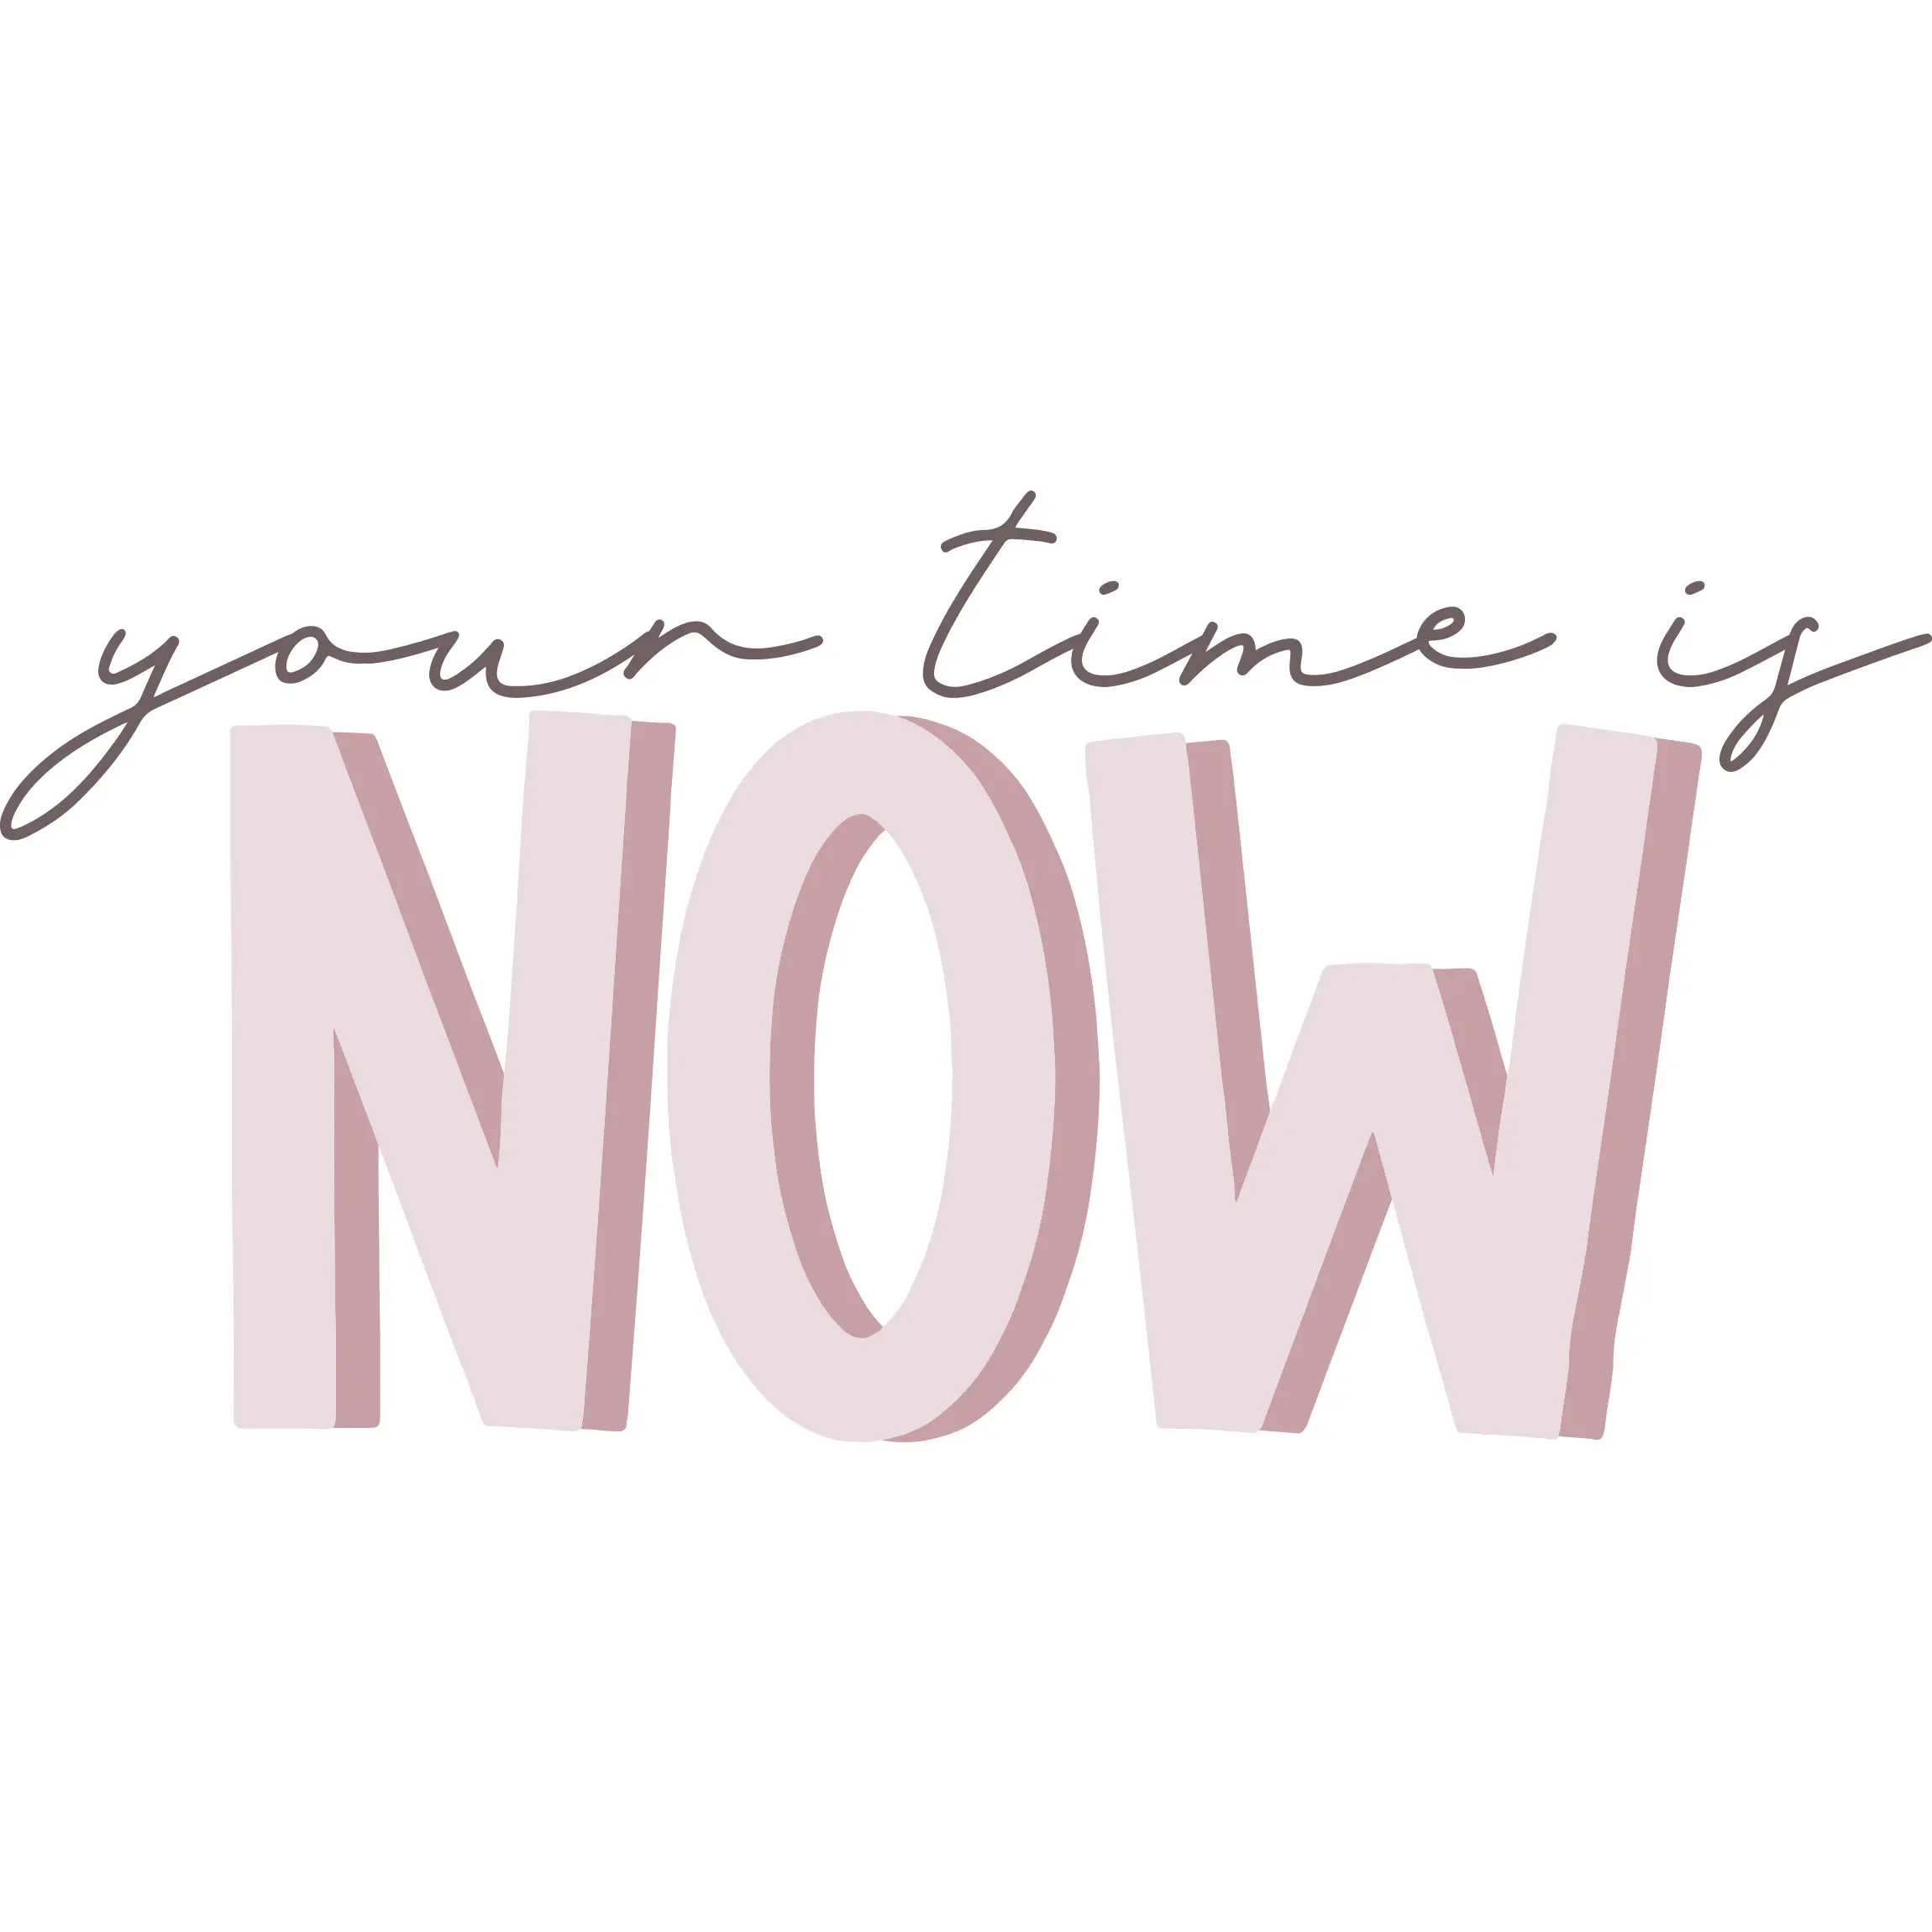 Your time is now